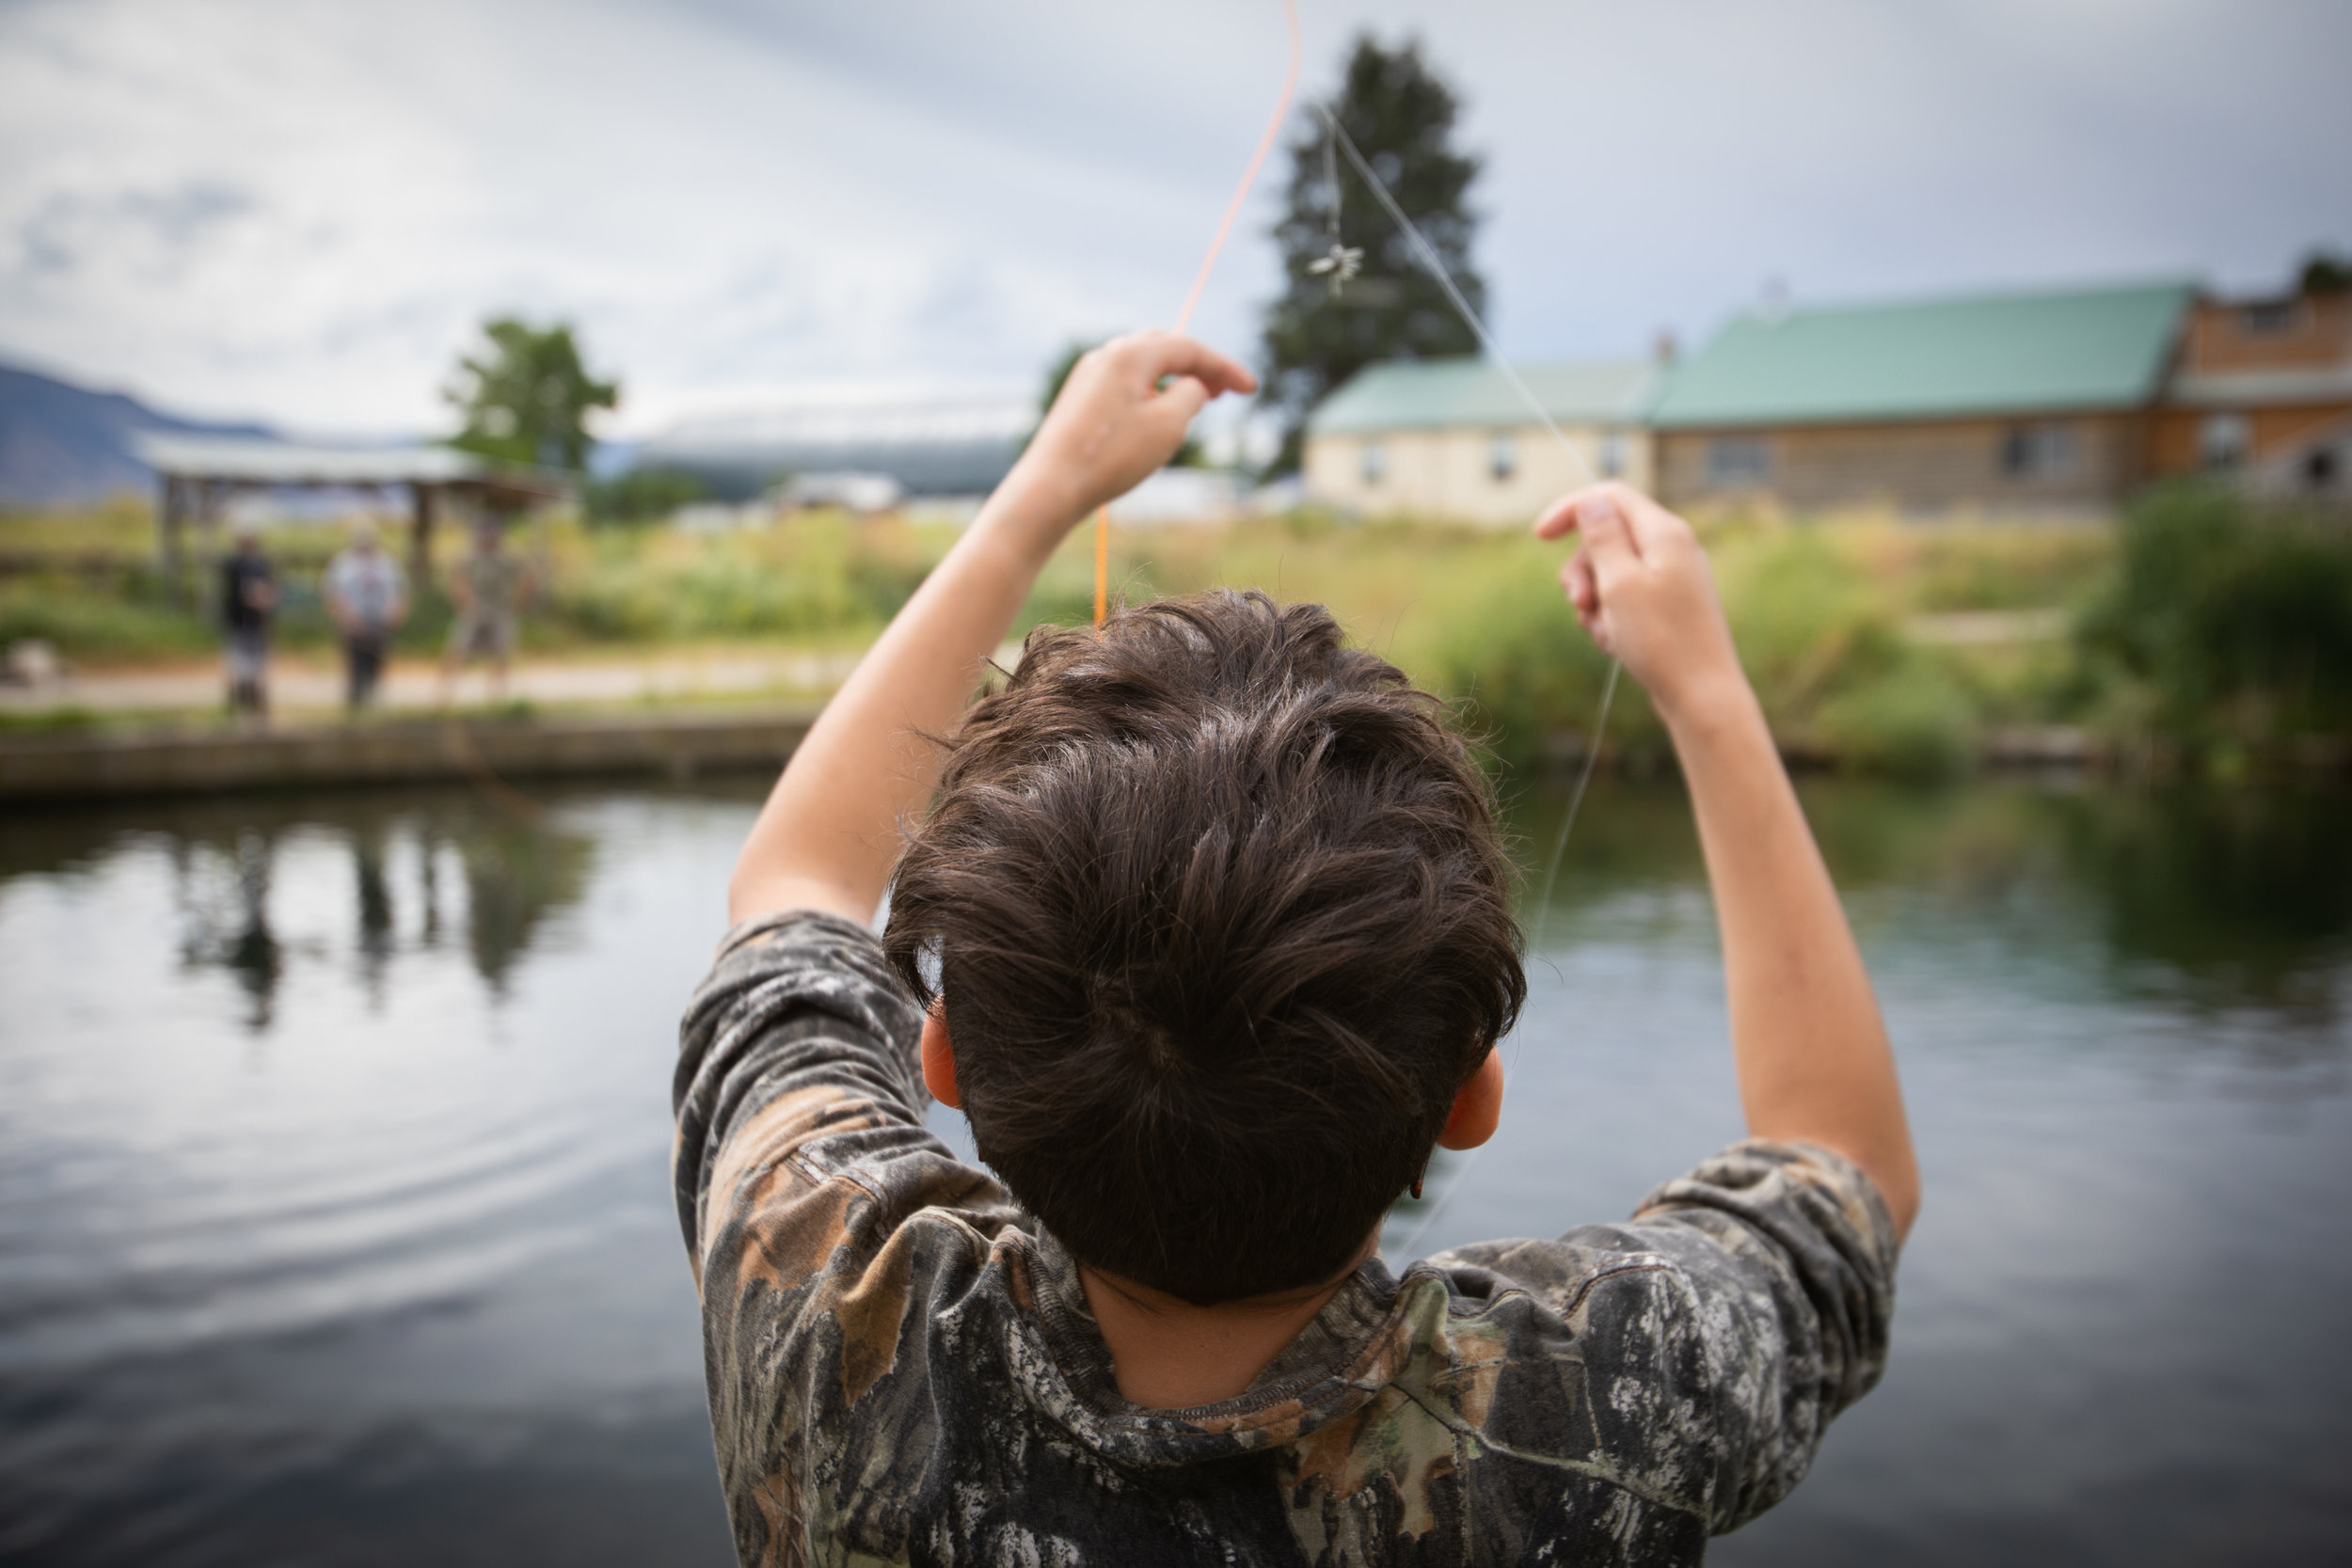  Utah foster care children fly fish on a trout pond on Saturday, July 14, 2018, in Smithfield. The outing was one of several this summer that was part of The Mayfly Project, a national non-profit that uses fly fishing to mentor foster care children. 